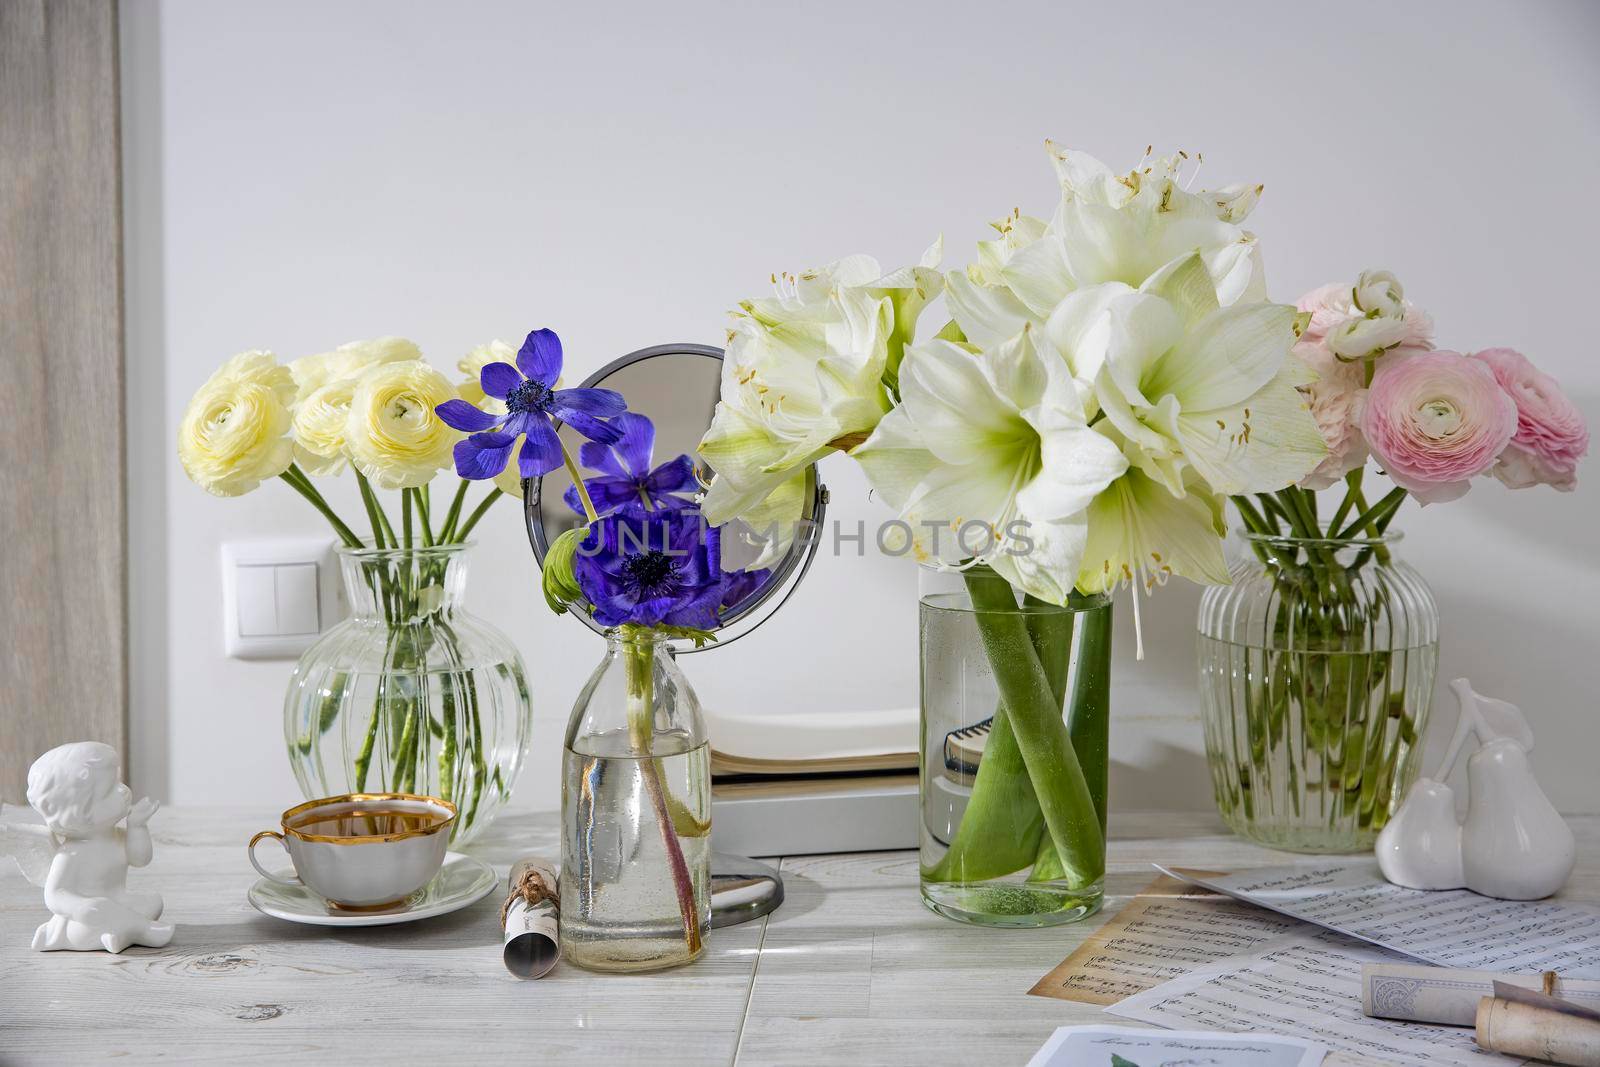 Moscow, Russia - 14 December 2020, A bouquet of white roses in a round glass vase, a bouquet of white amaryllis, a cup of tea, a figurine on the table. Decoration of the kitchen. Rose Playa blanca